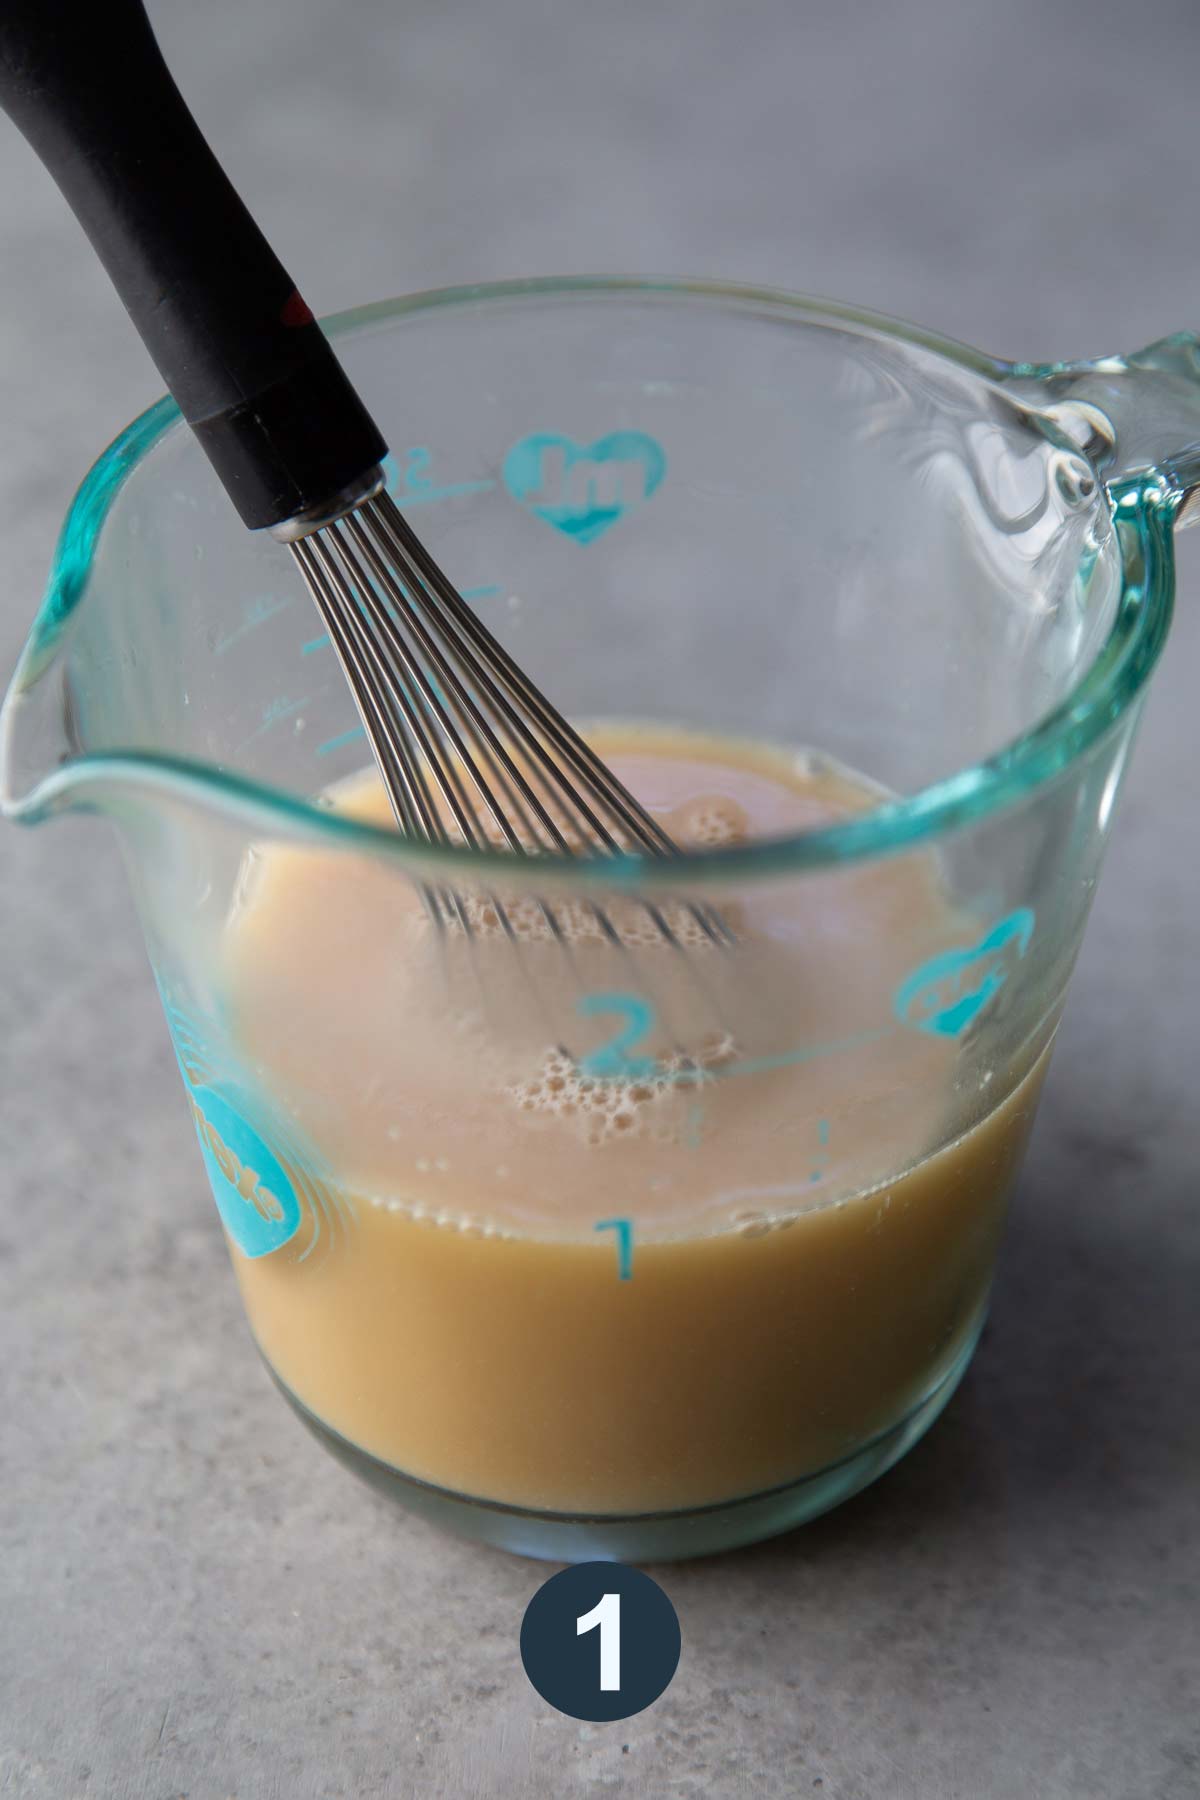 whisk together yeast, warm water, and barley malt syrup.